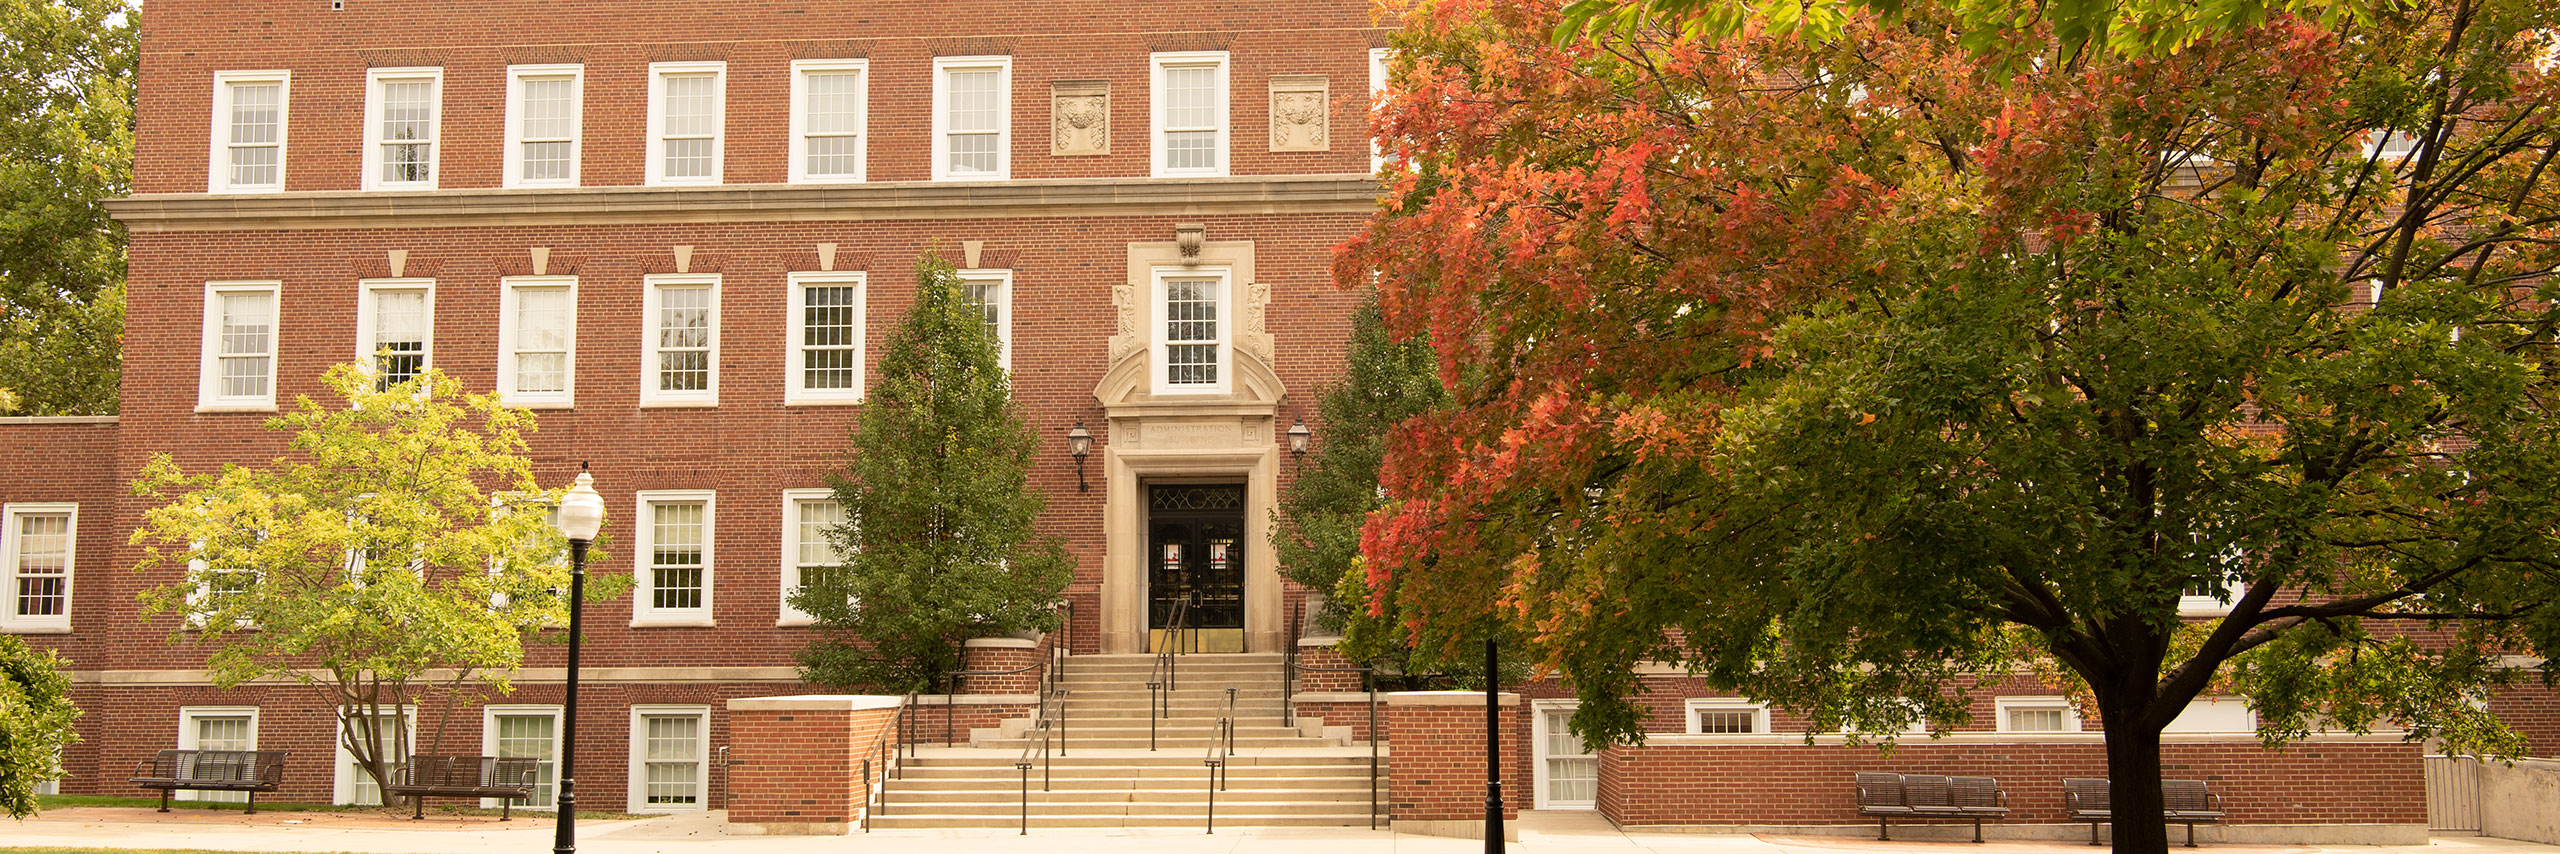 Hovey Hall building